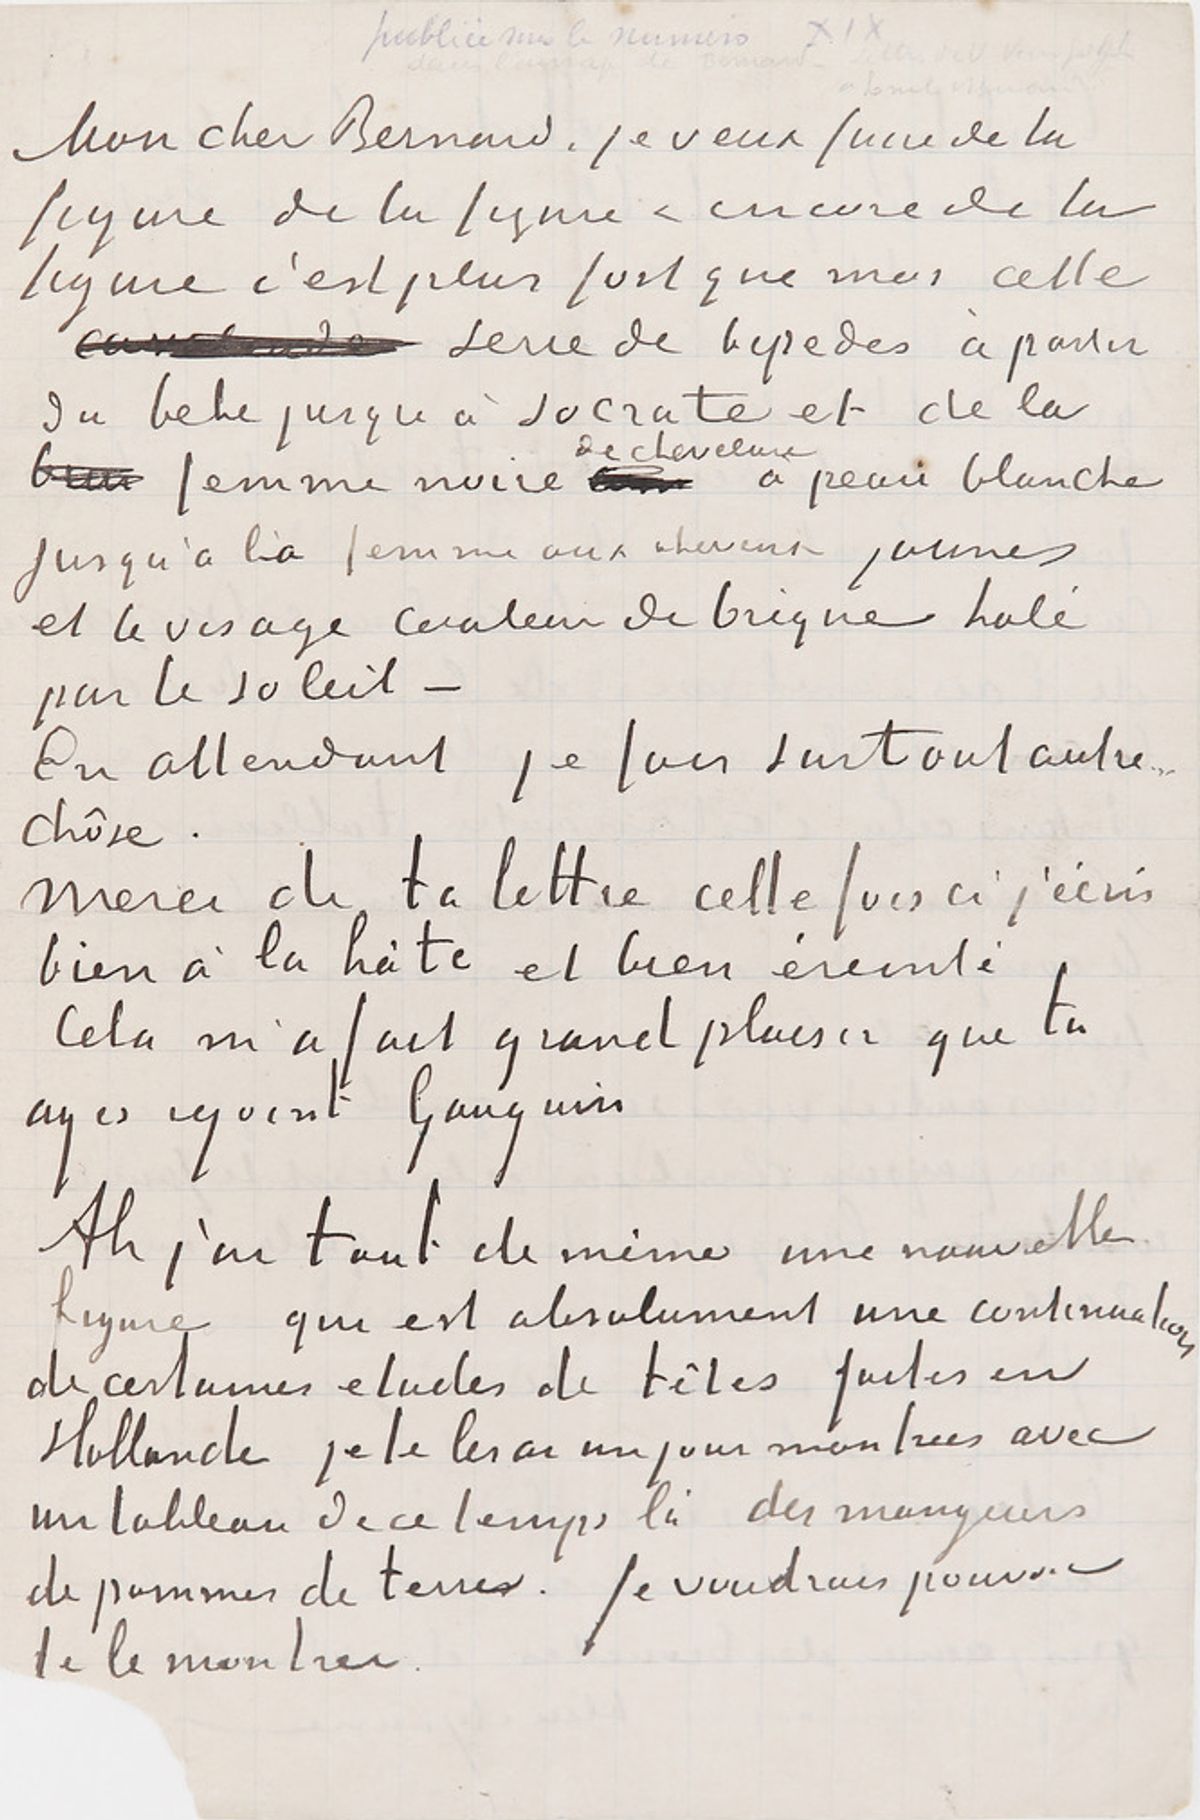 The first page of Van Gogh’s letter to Emile Bernard, around 21 August 1888 Credit: Collection of Anne-Marie Springer